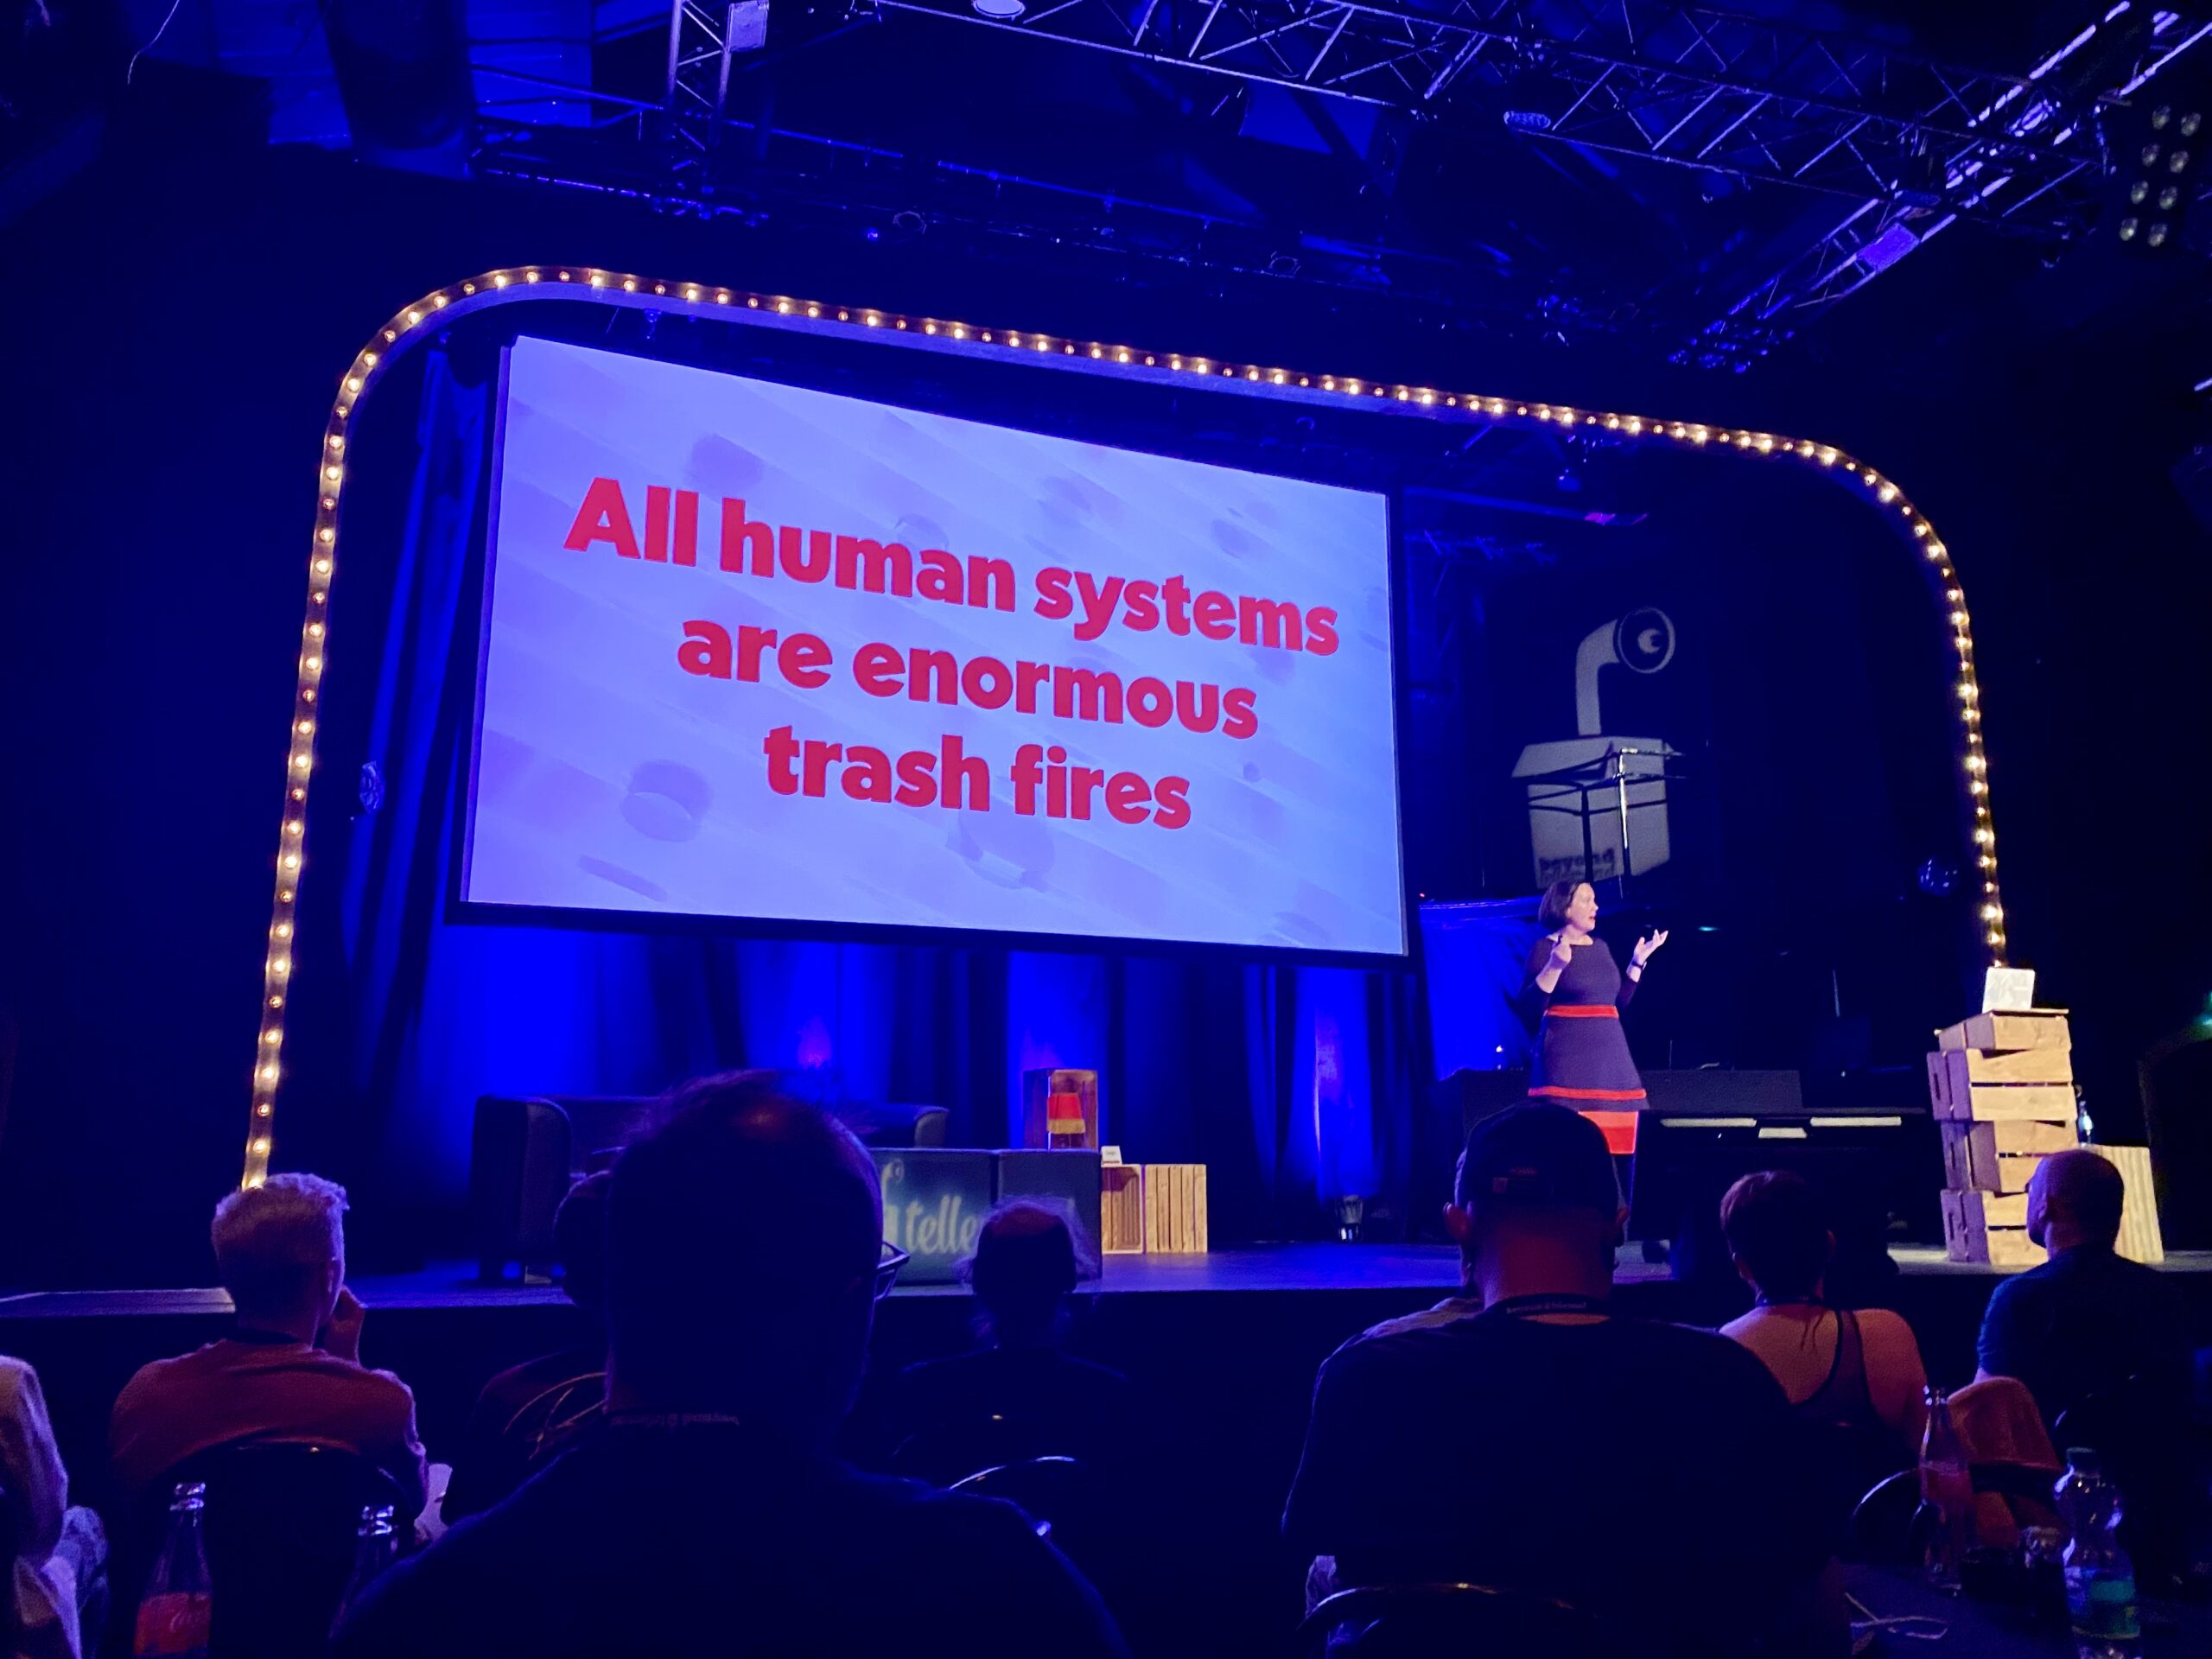 Presentation slide by Sacha Judd with text in which it reads "All human systems are trash fire"